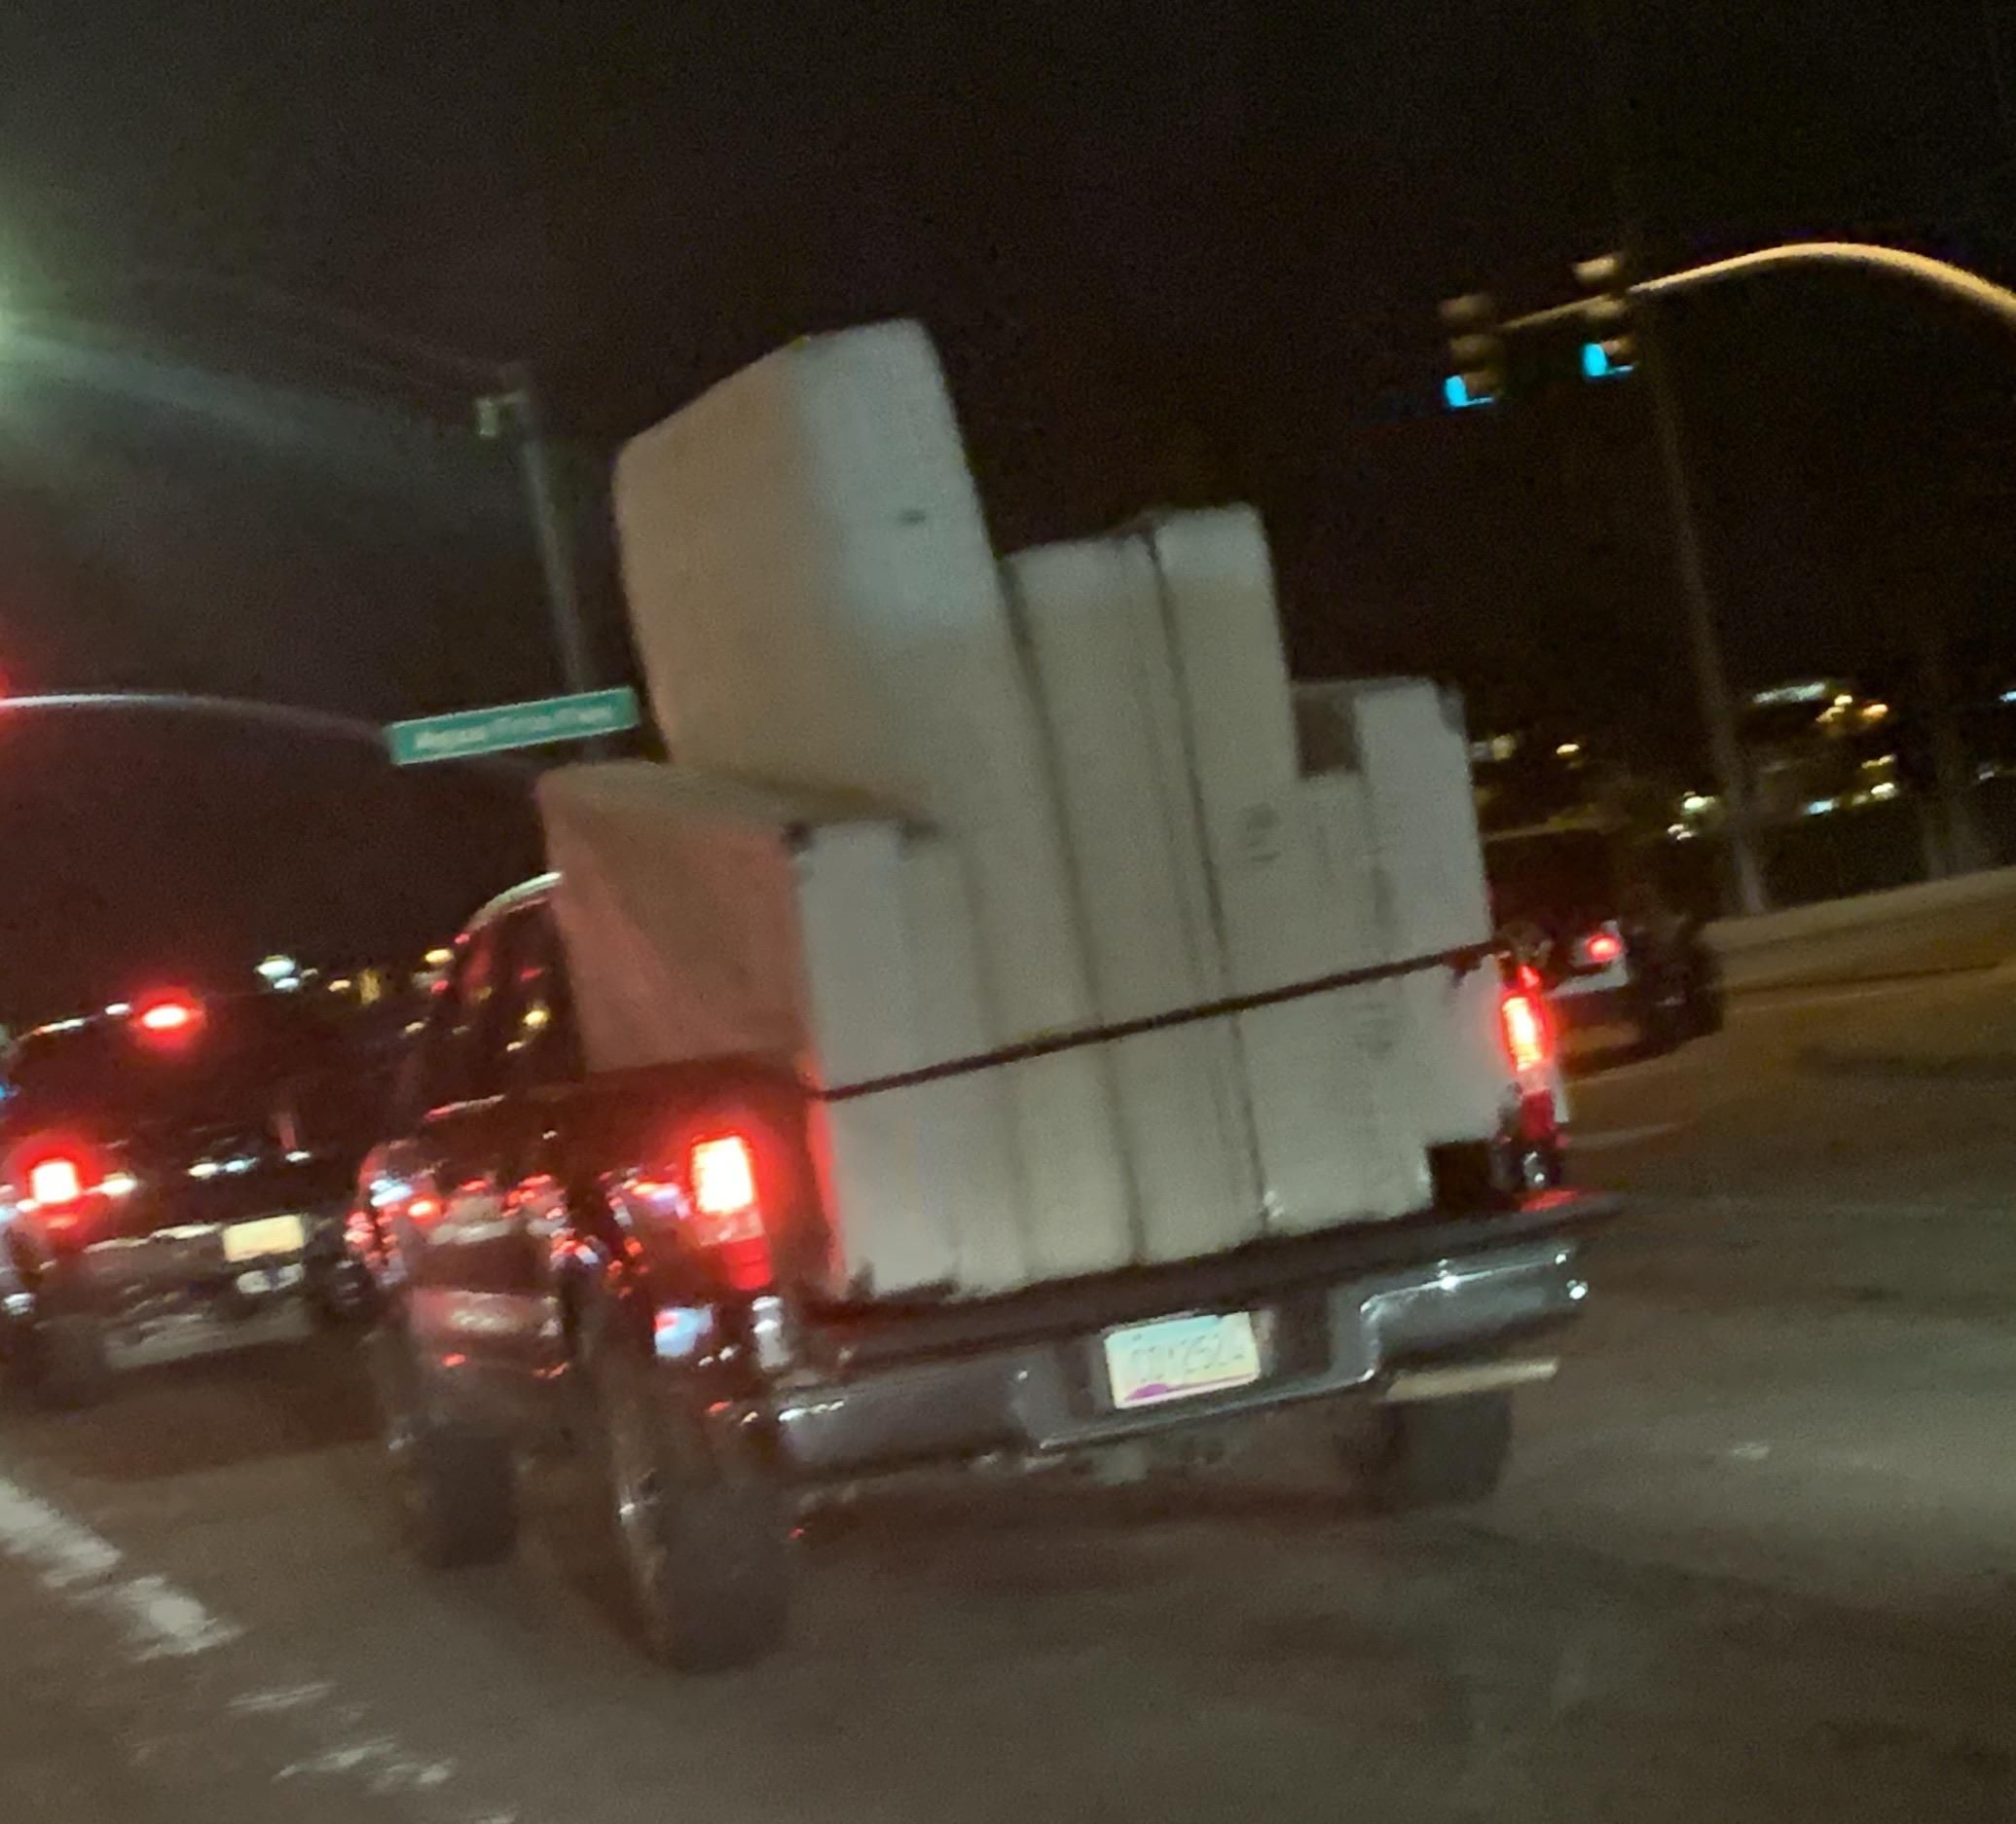 Math in Real Life: These mattresses are a bar chart showing the probability of each mattress falling off the back of the truck.